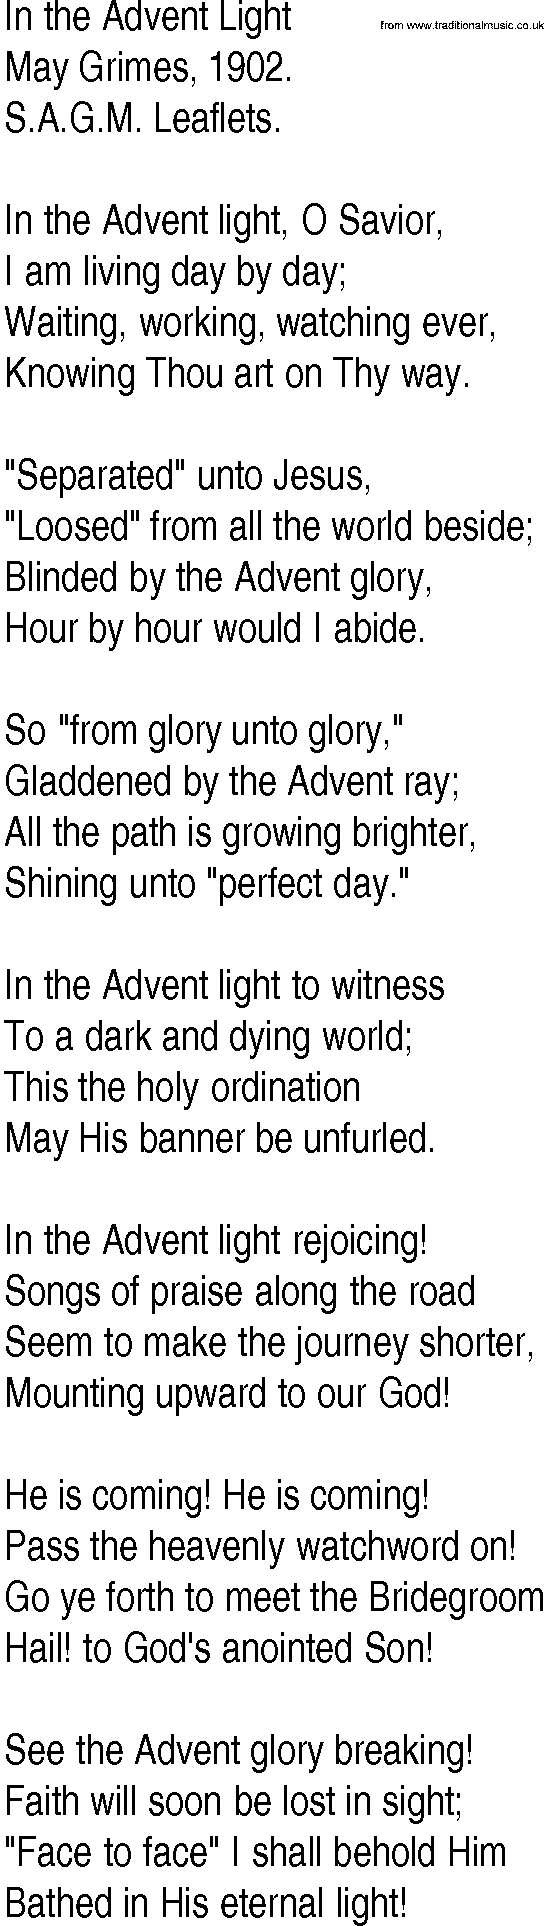 Hymn and Gospel Song: In the Advent Light by May Grimes lyrics